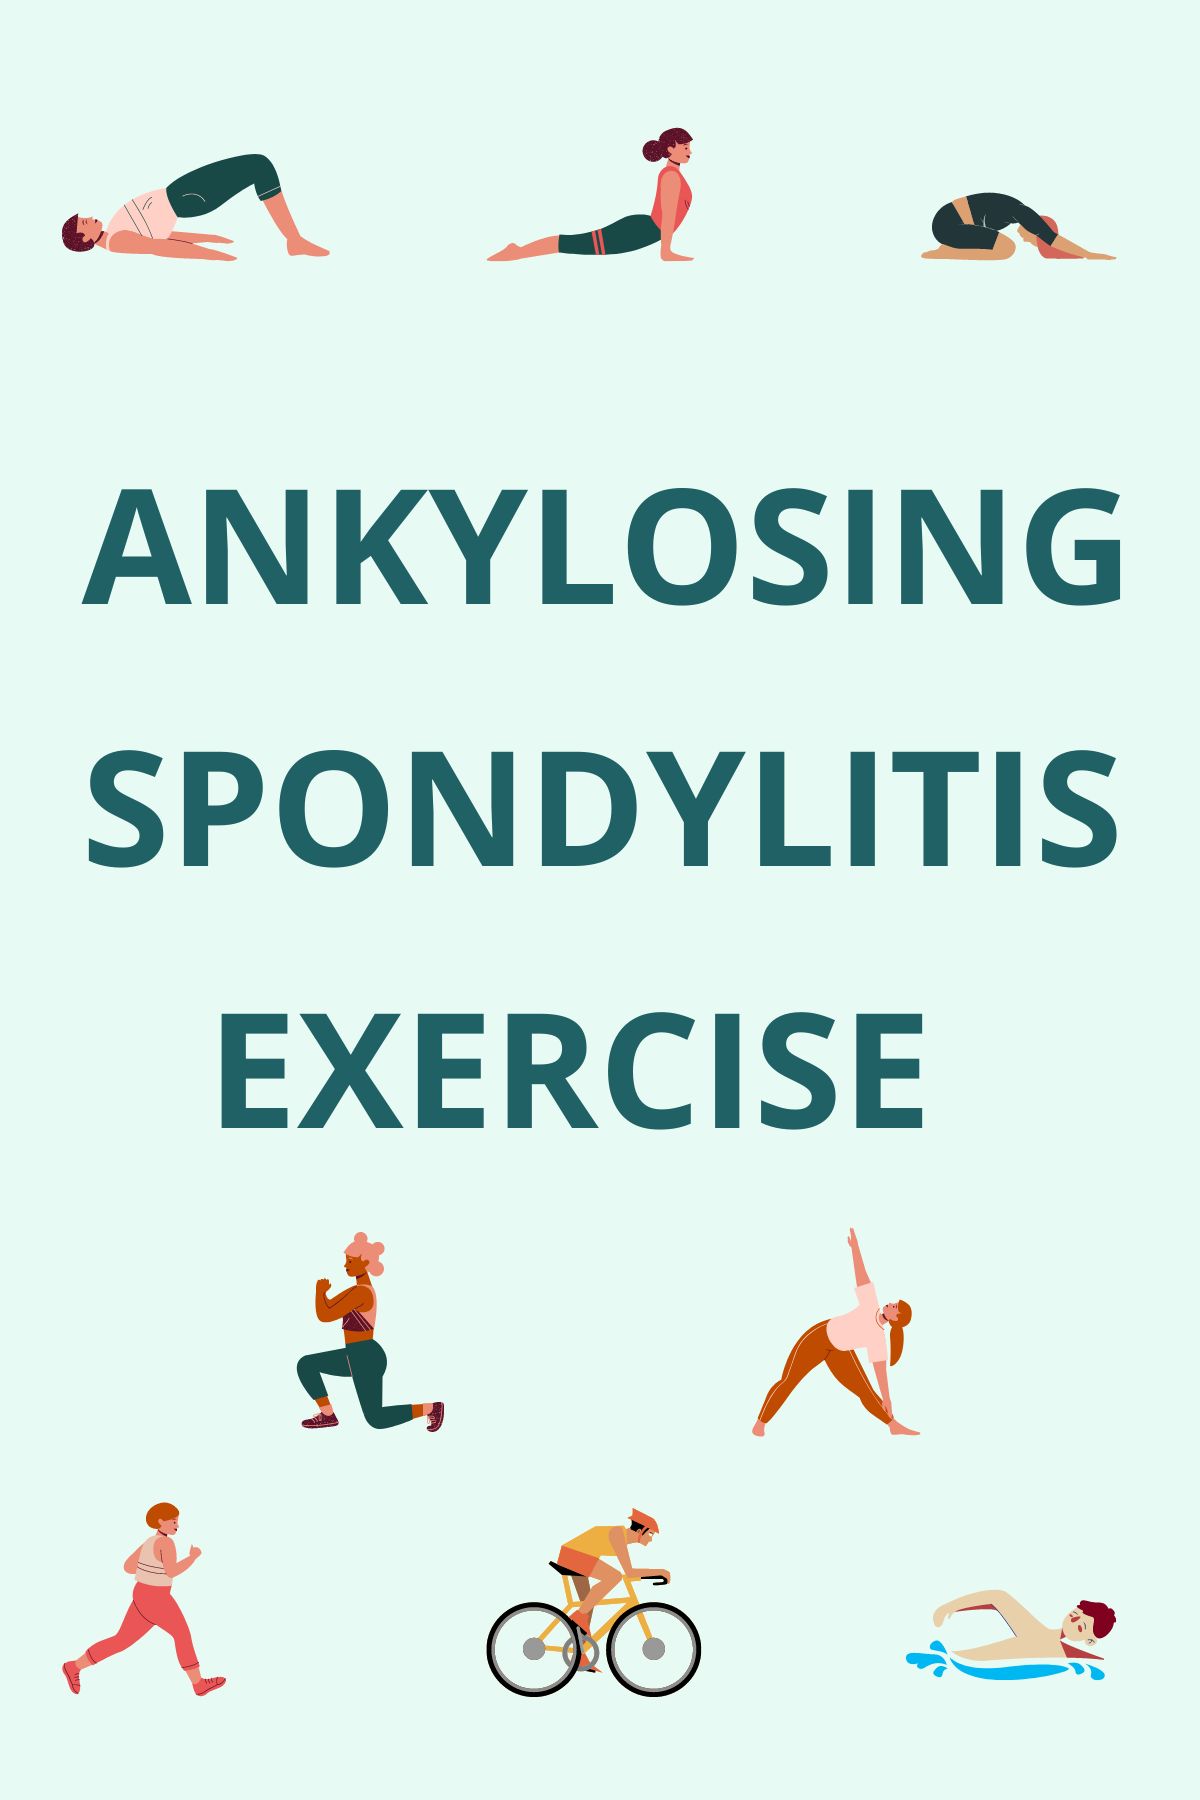 Collage with illustrations of exercises and the title "ankylosing spondylitis exercise" written in the center.